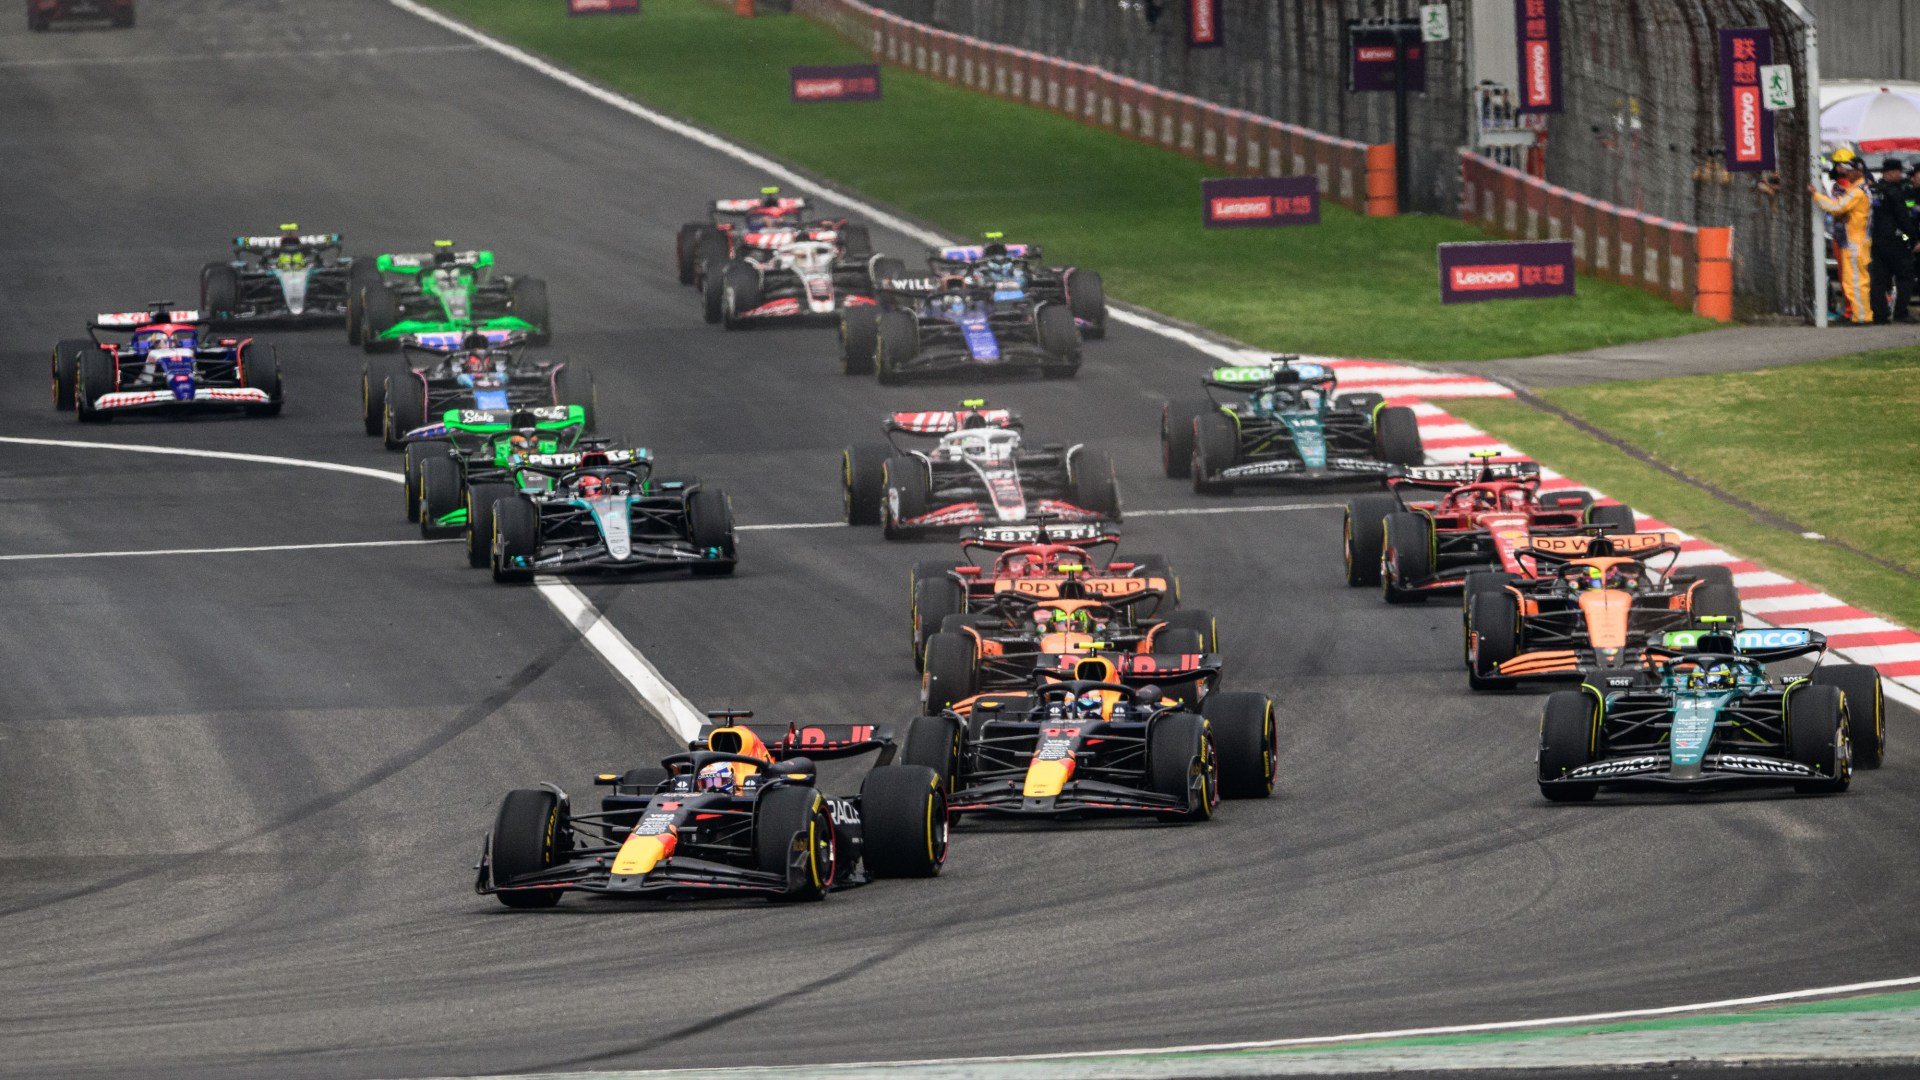 Revolutionary change to F1 proposed that would allow THREE new teams but there are two major catches